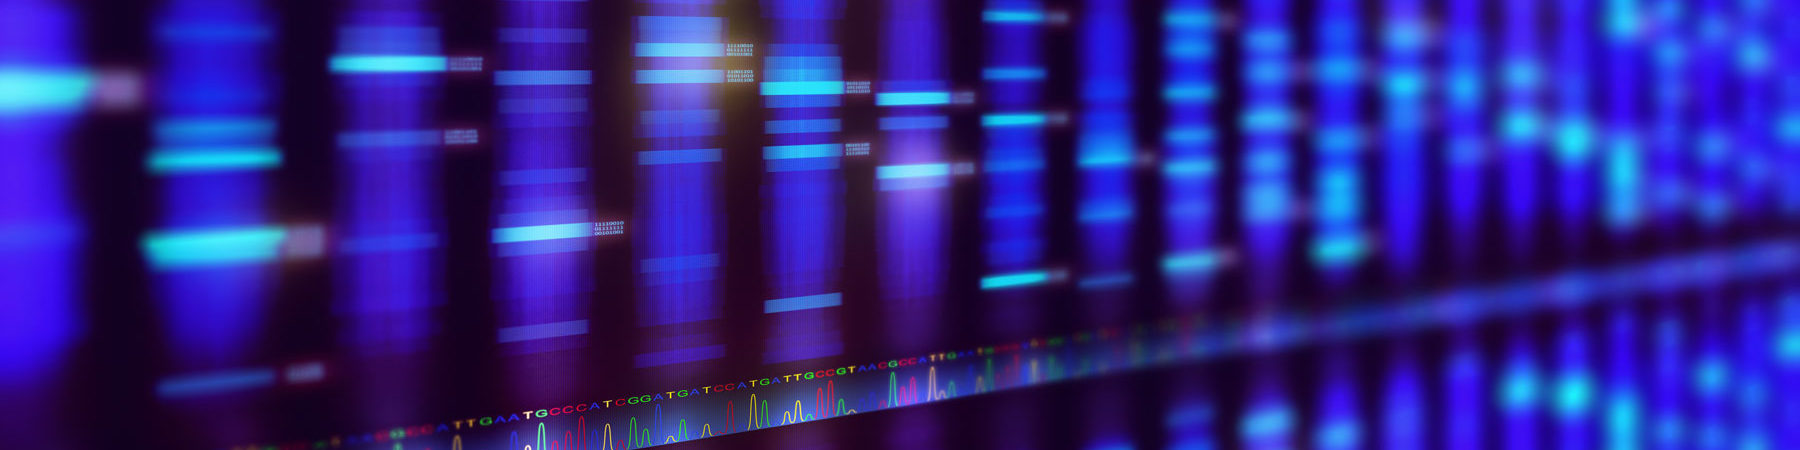 Illustration of a method of DNA sequencing. Image with depth of field.